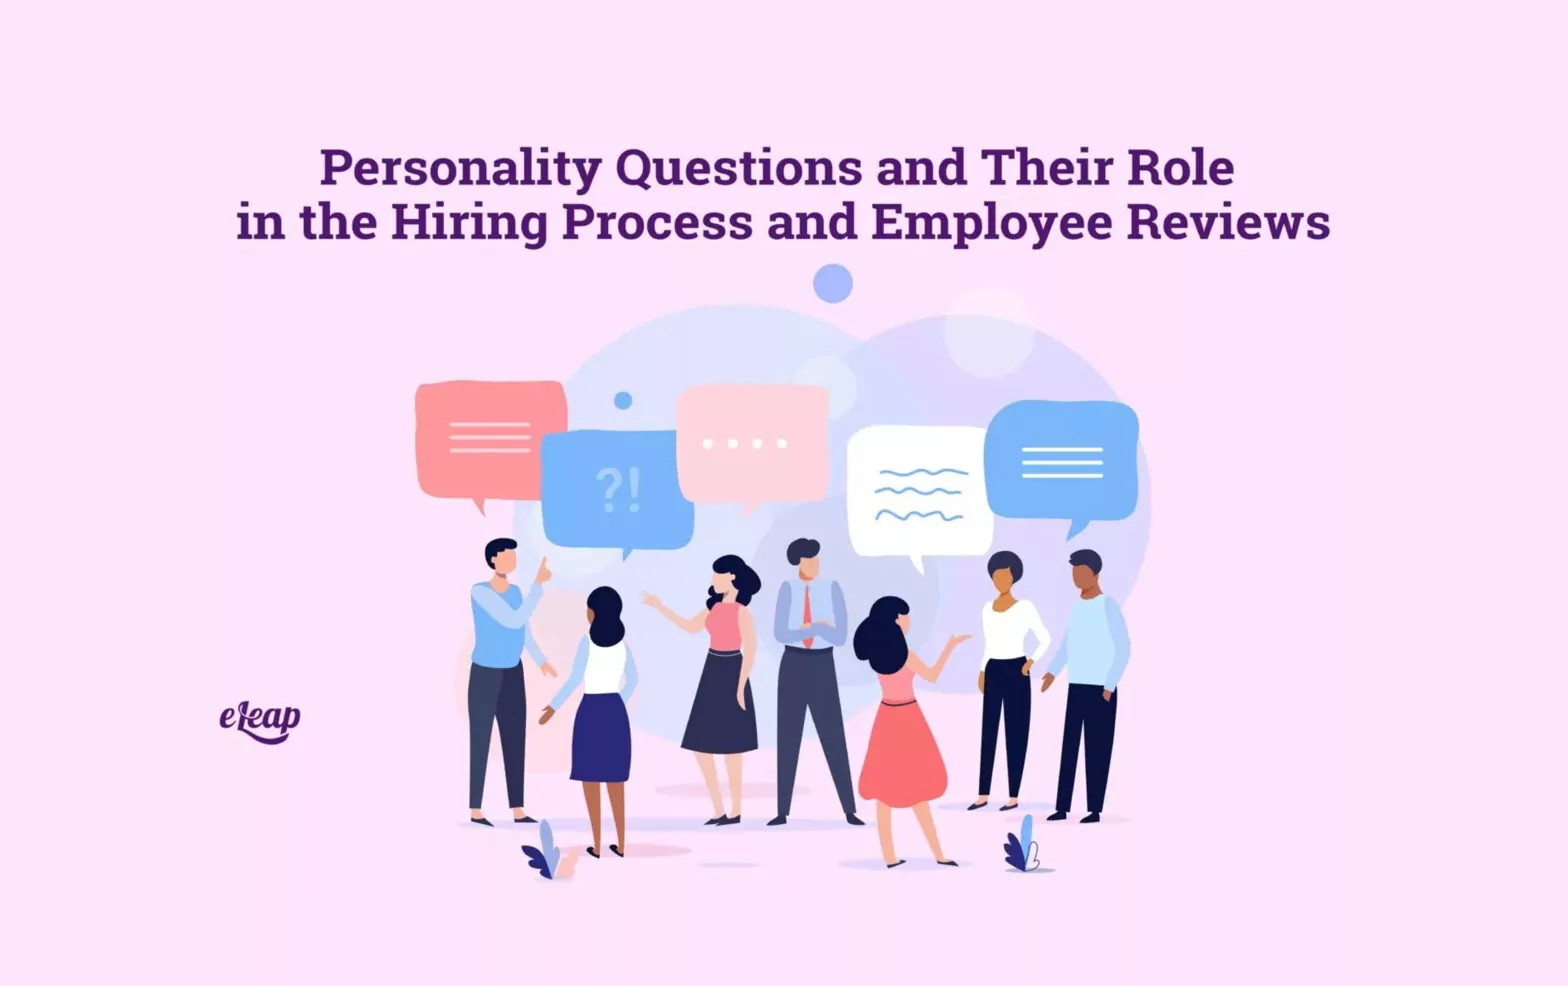 Personality Questions and Their Role in the Hiring Process and Employee Reviews